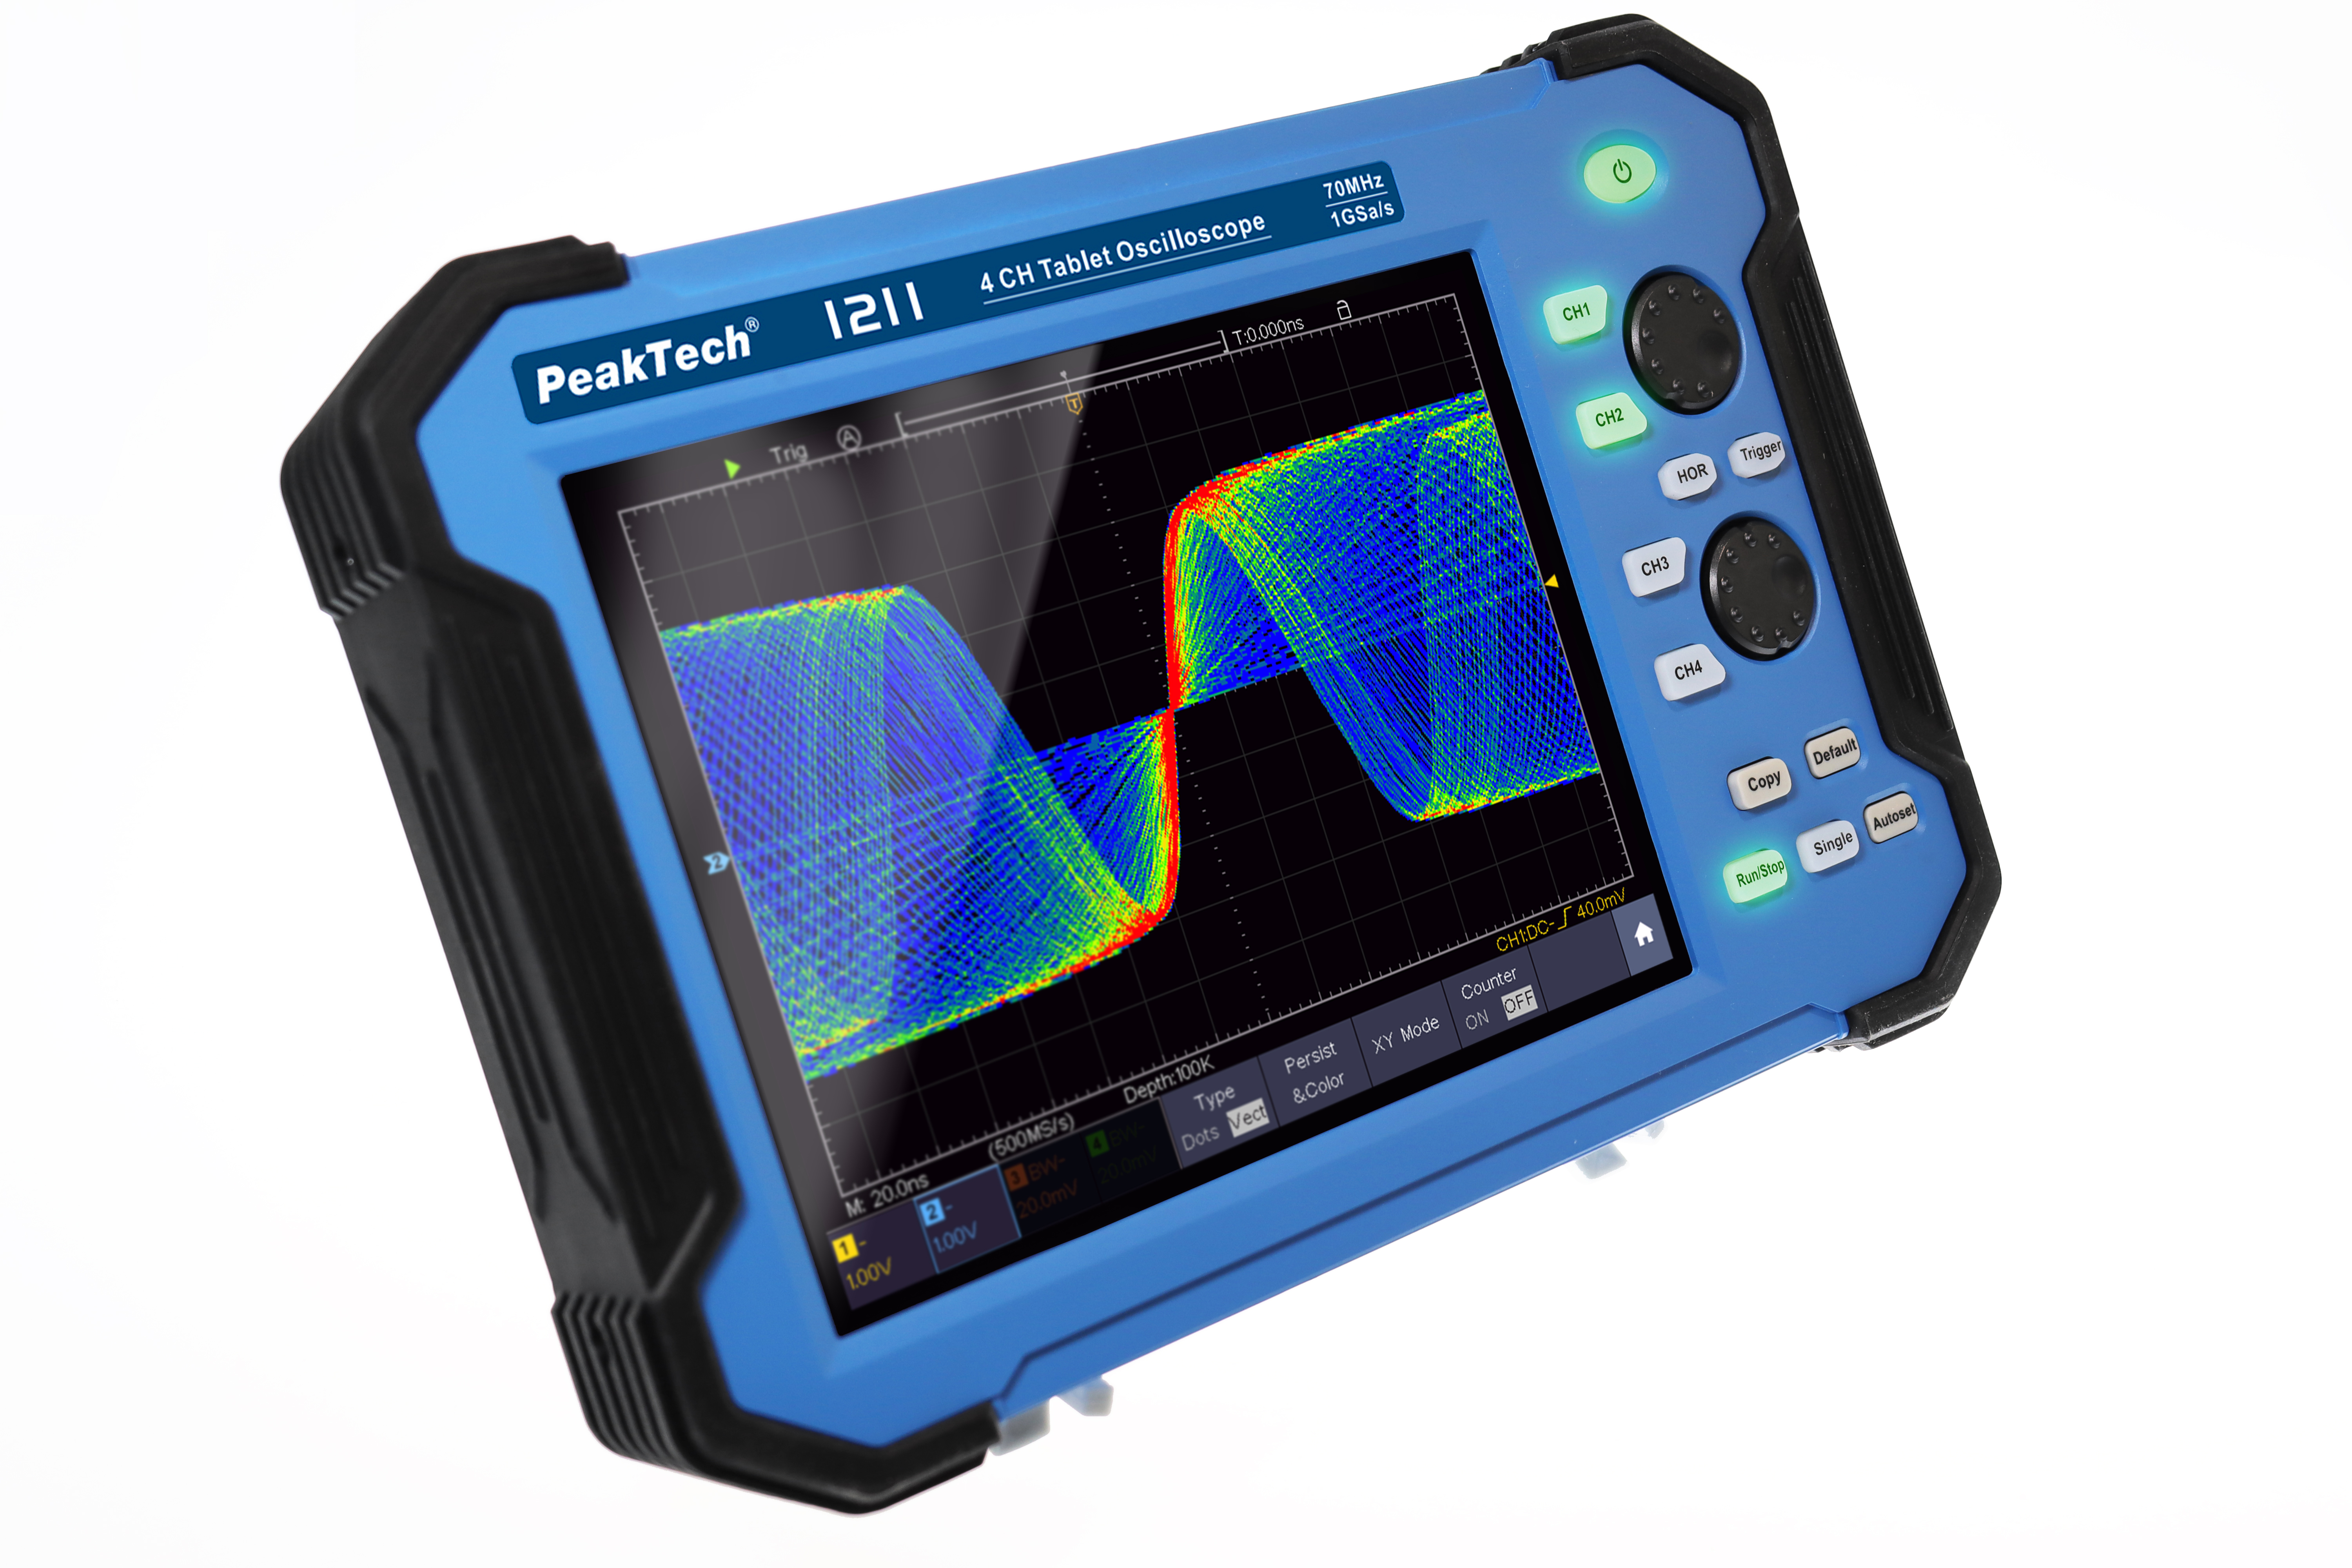 «PeakTech® P 1211» 70 MHz / 4 CH, 1 GS/s tablet oscilloscope